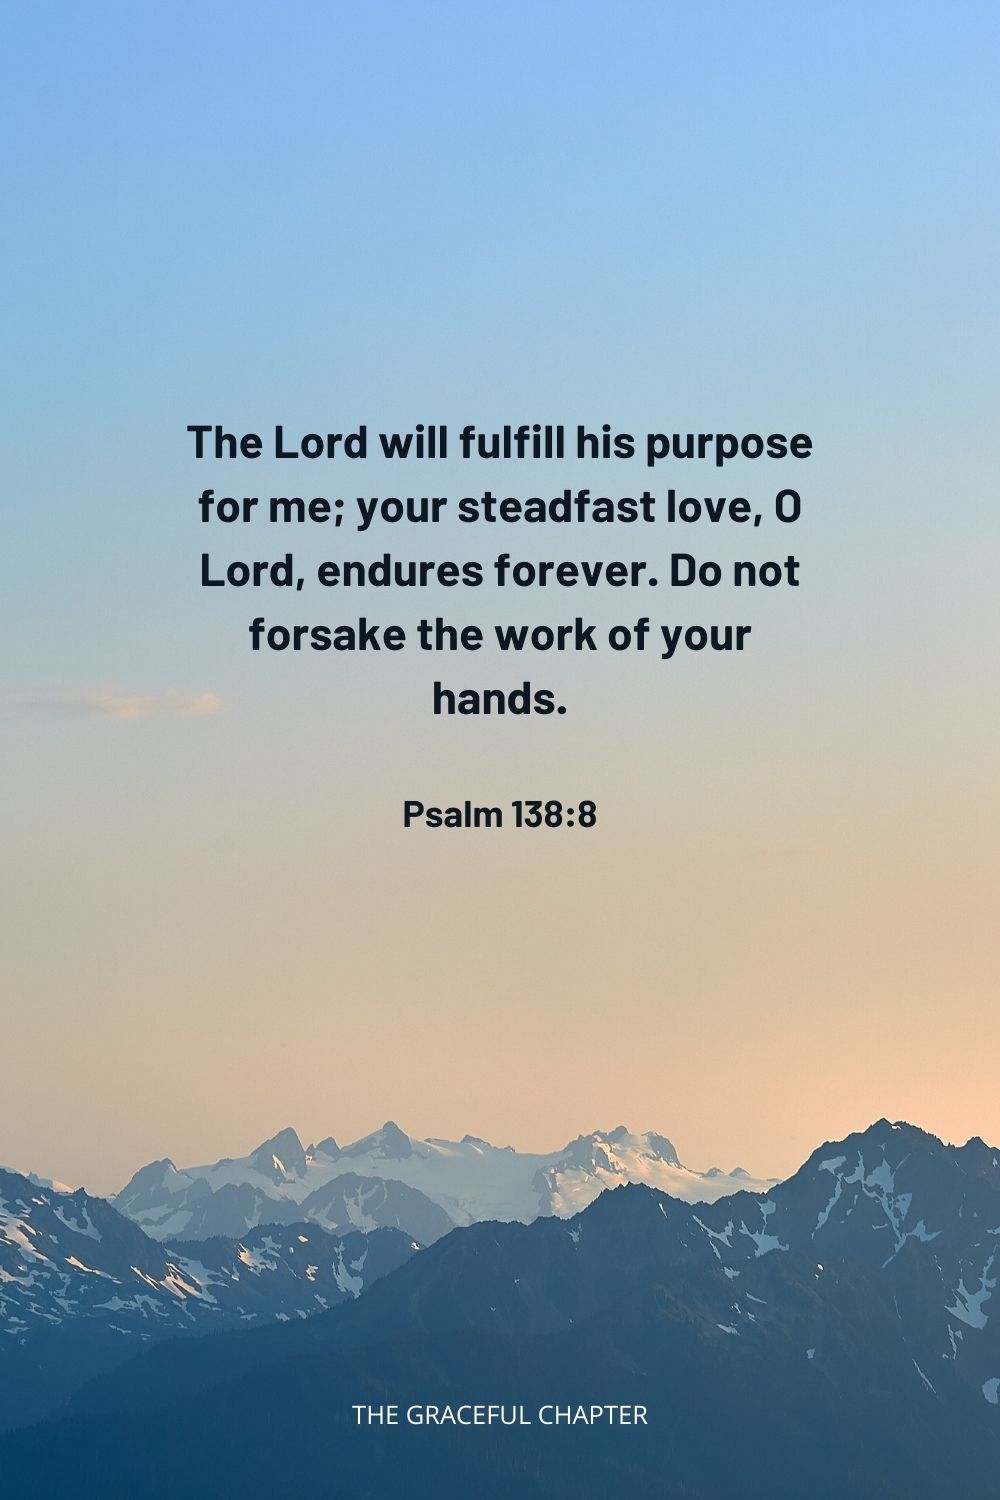 The Lord will fulfill his purpose for me; your steadfast love, O Lord, endures forever. Do not forsake the work of your hands. Psalm 138:8